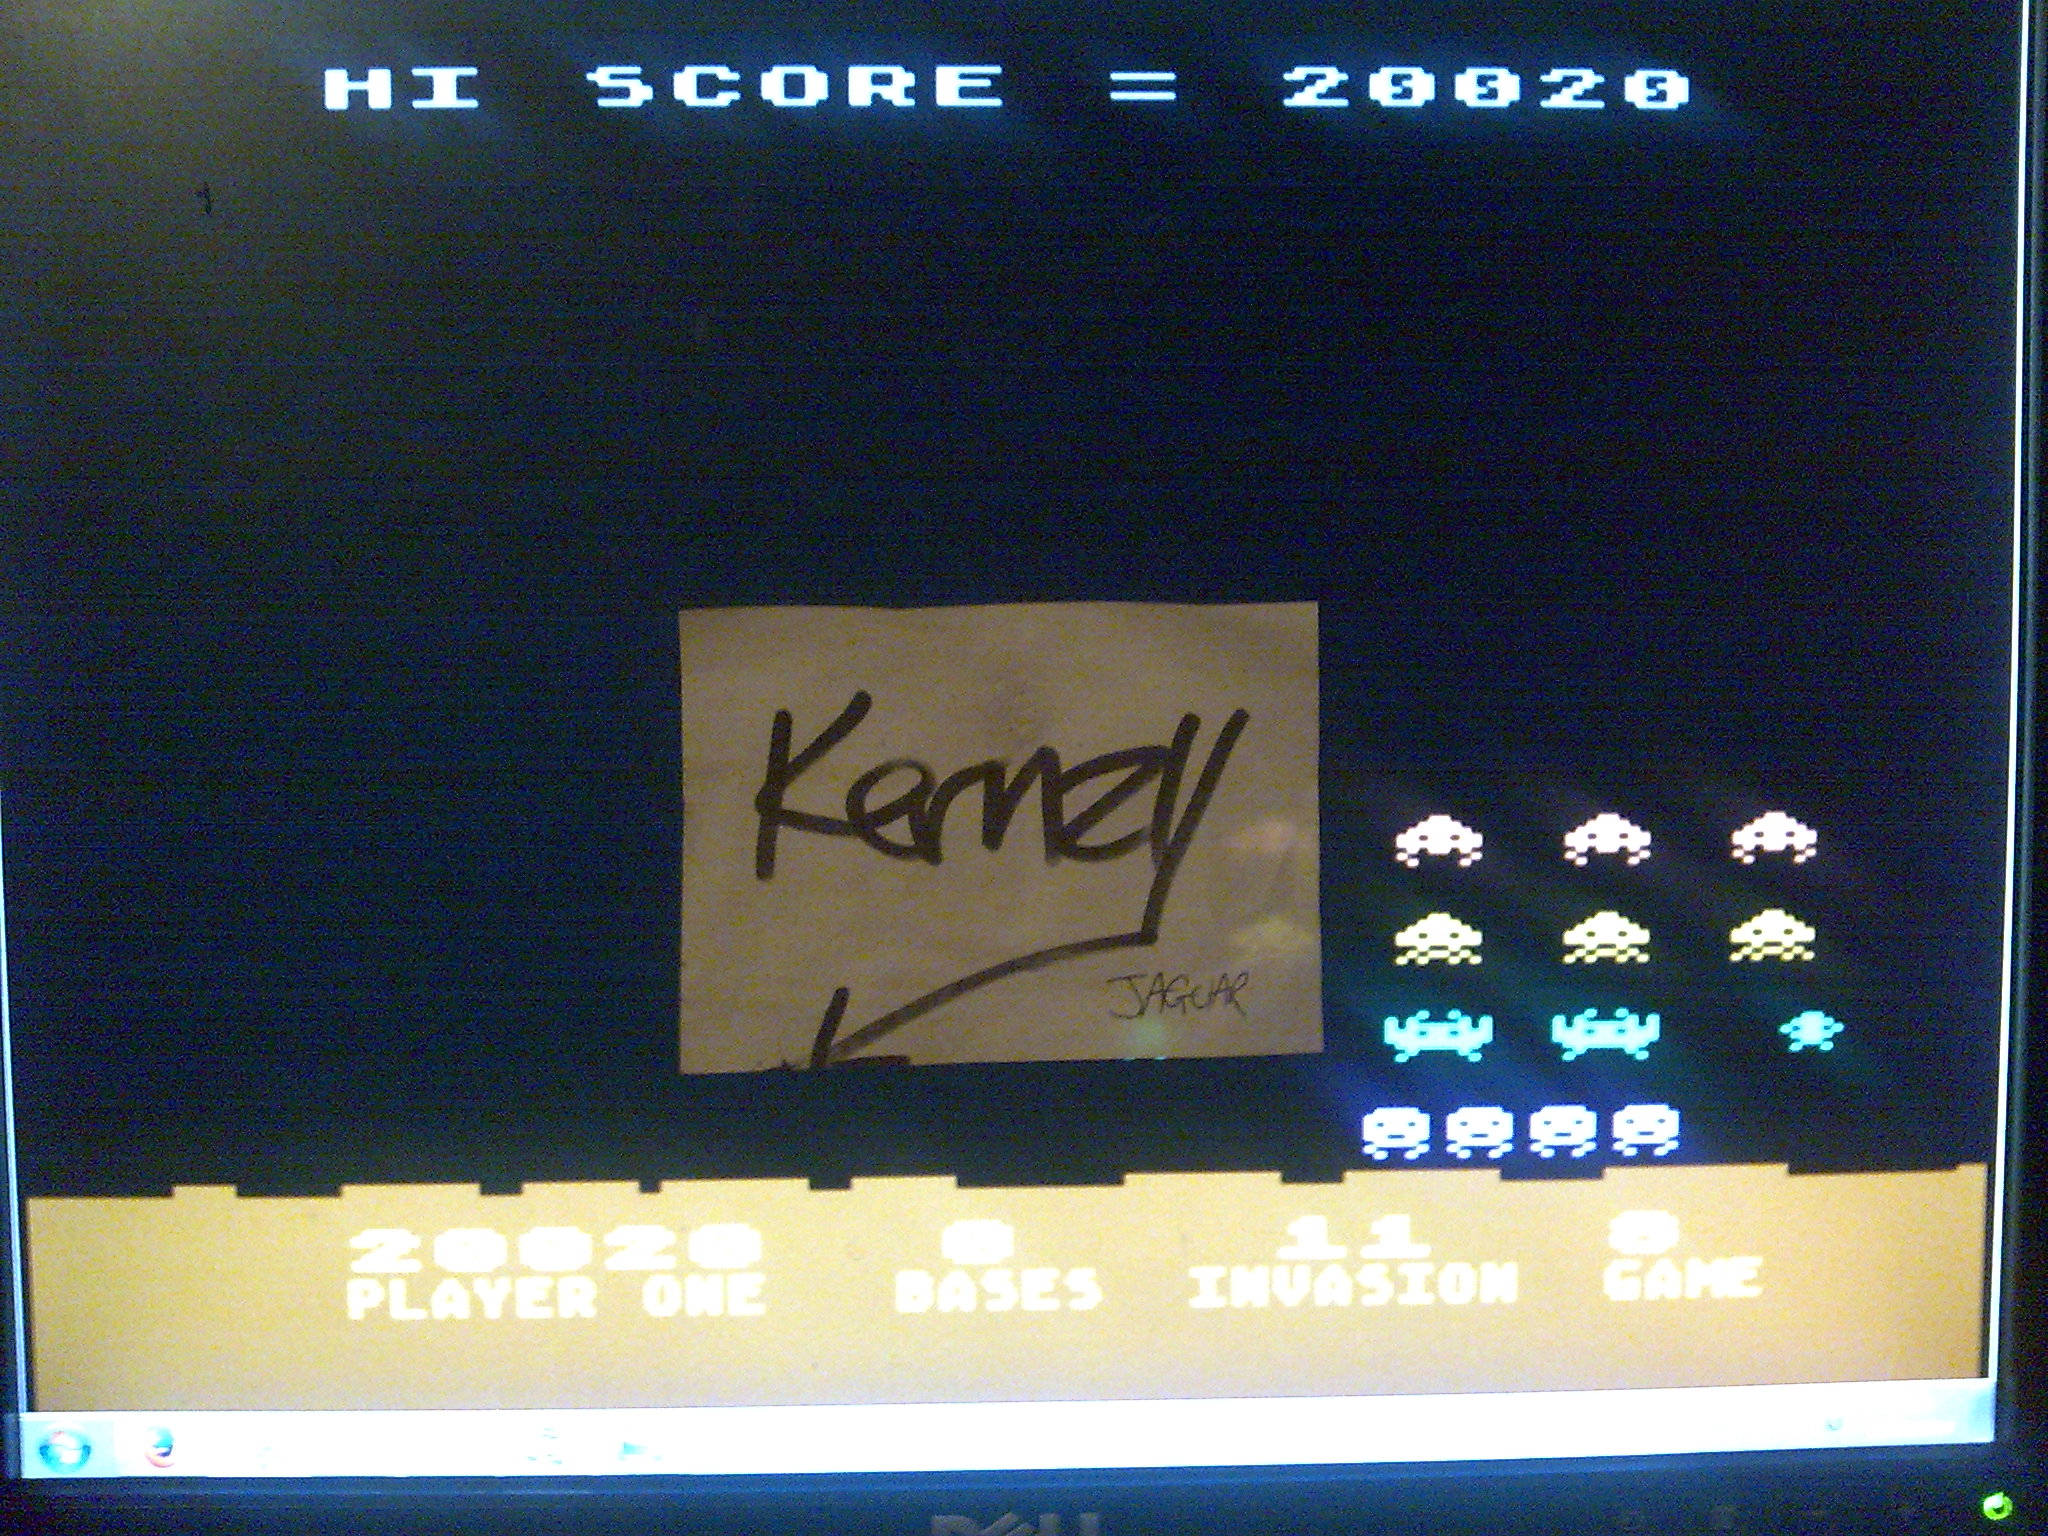 kernzy: Deluxe Invaders: Game 8 (Atari 400/800/XL/XE Emulated) 20,020 points on 2014-10-29 07:53:11